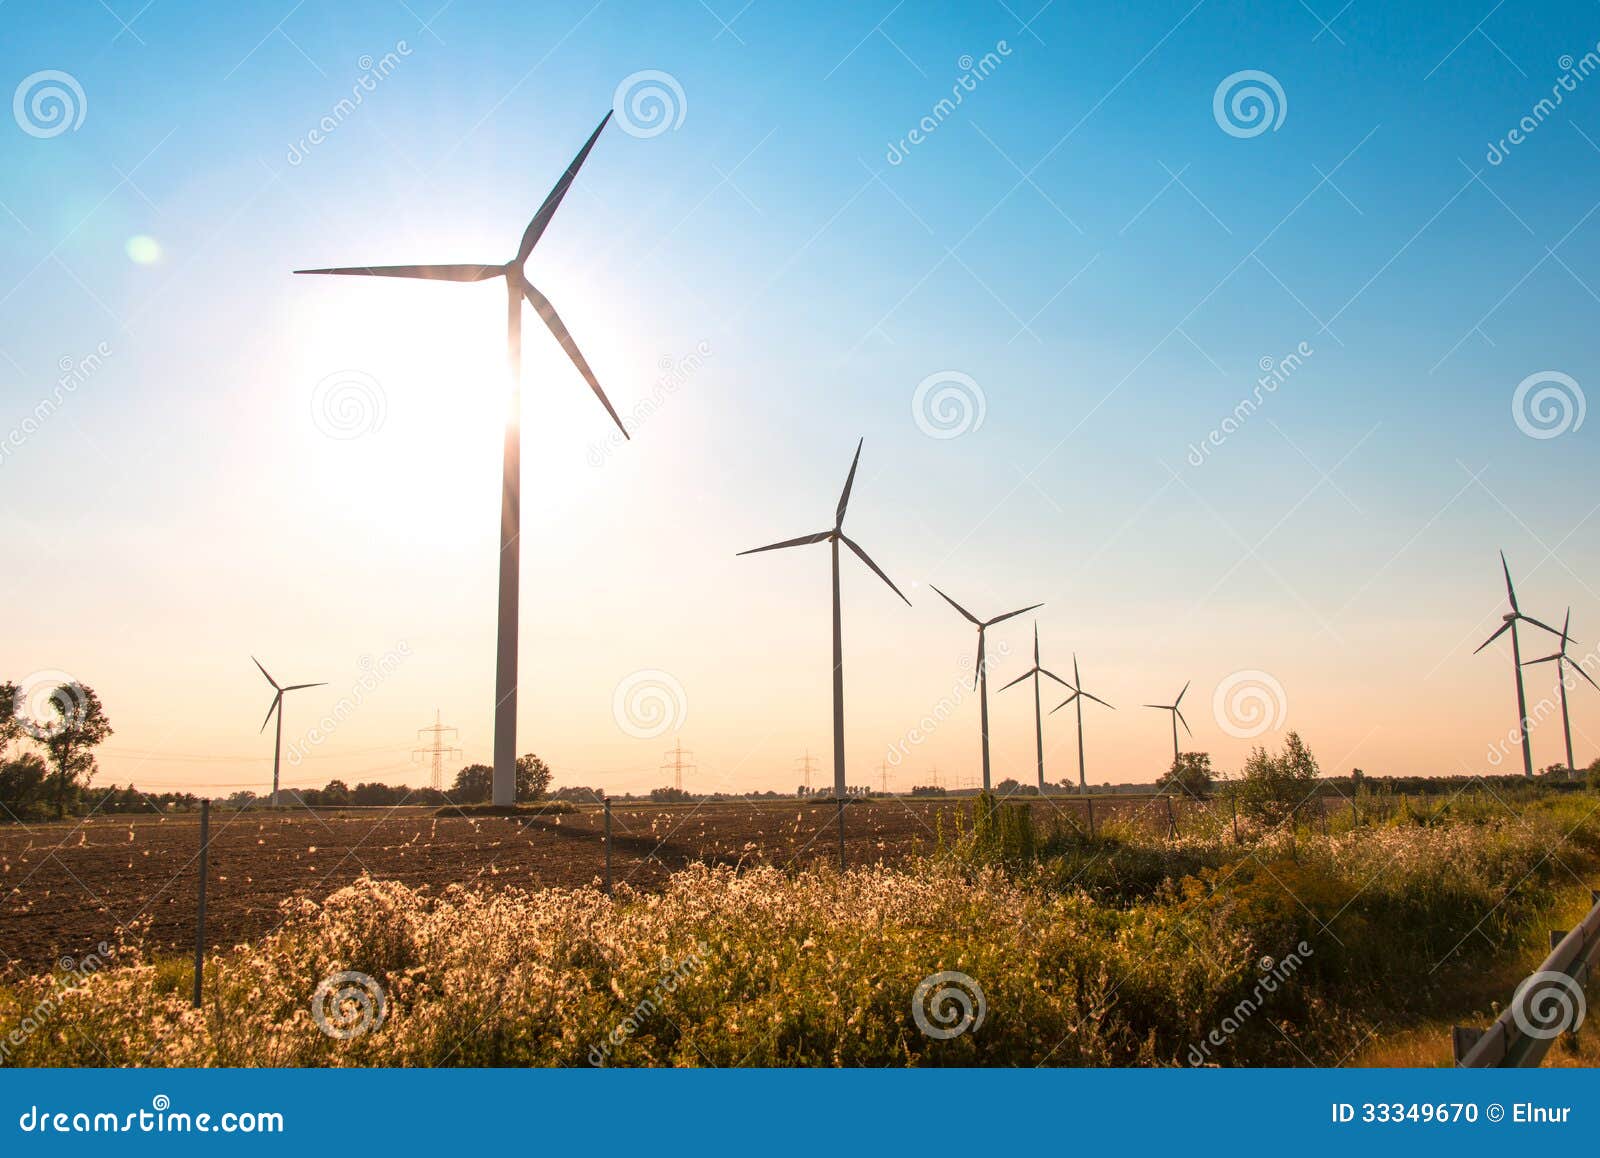 wind mills during bright